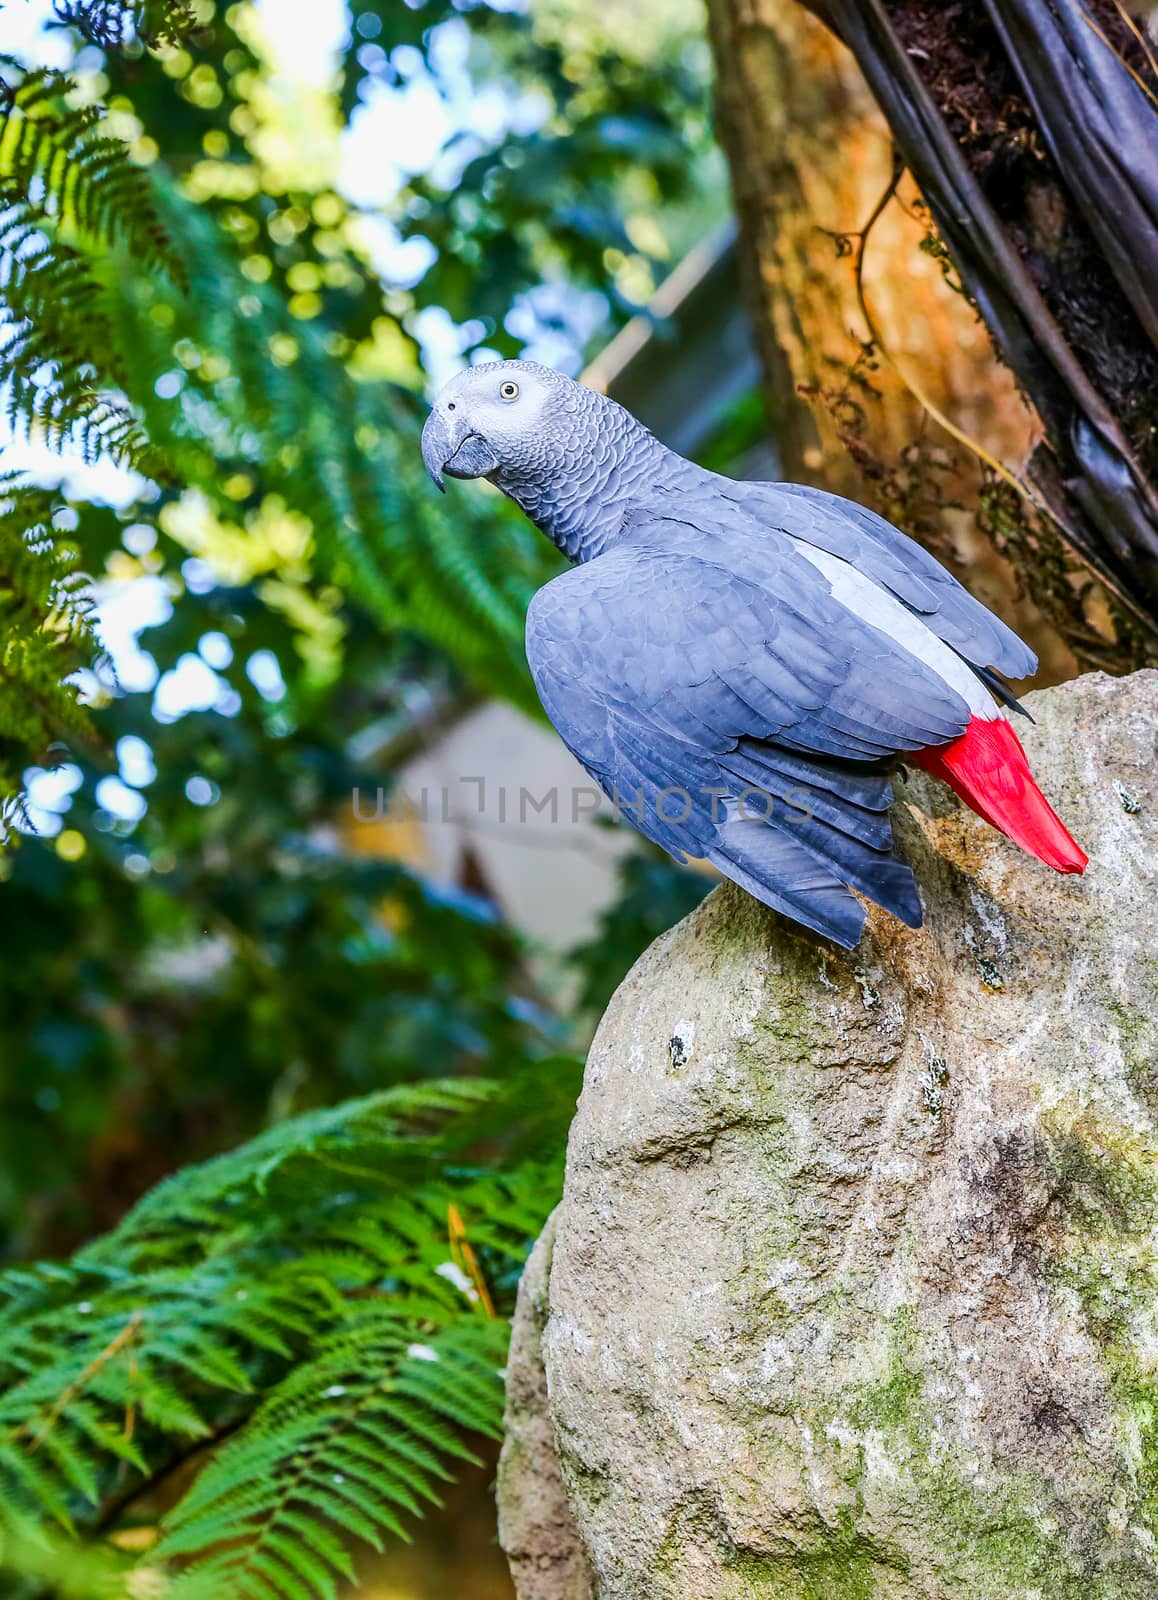 image of a parrot on top of a rock outdoors in the forest